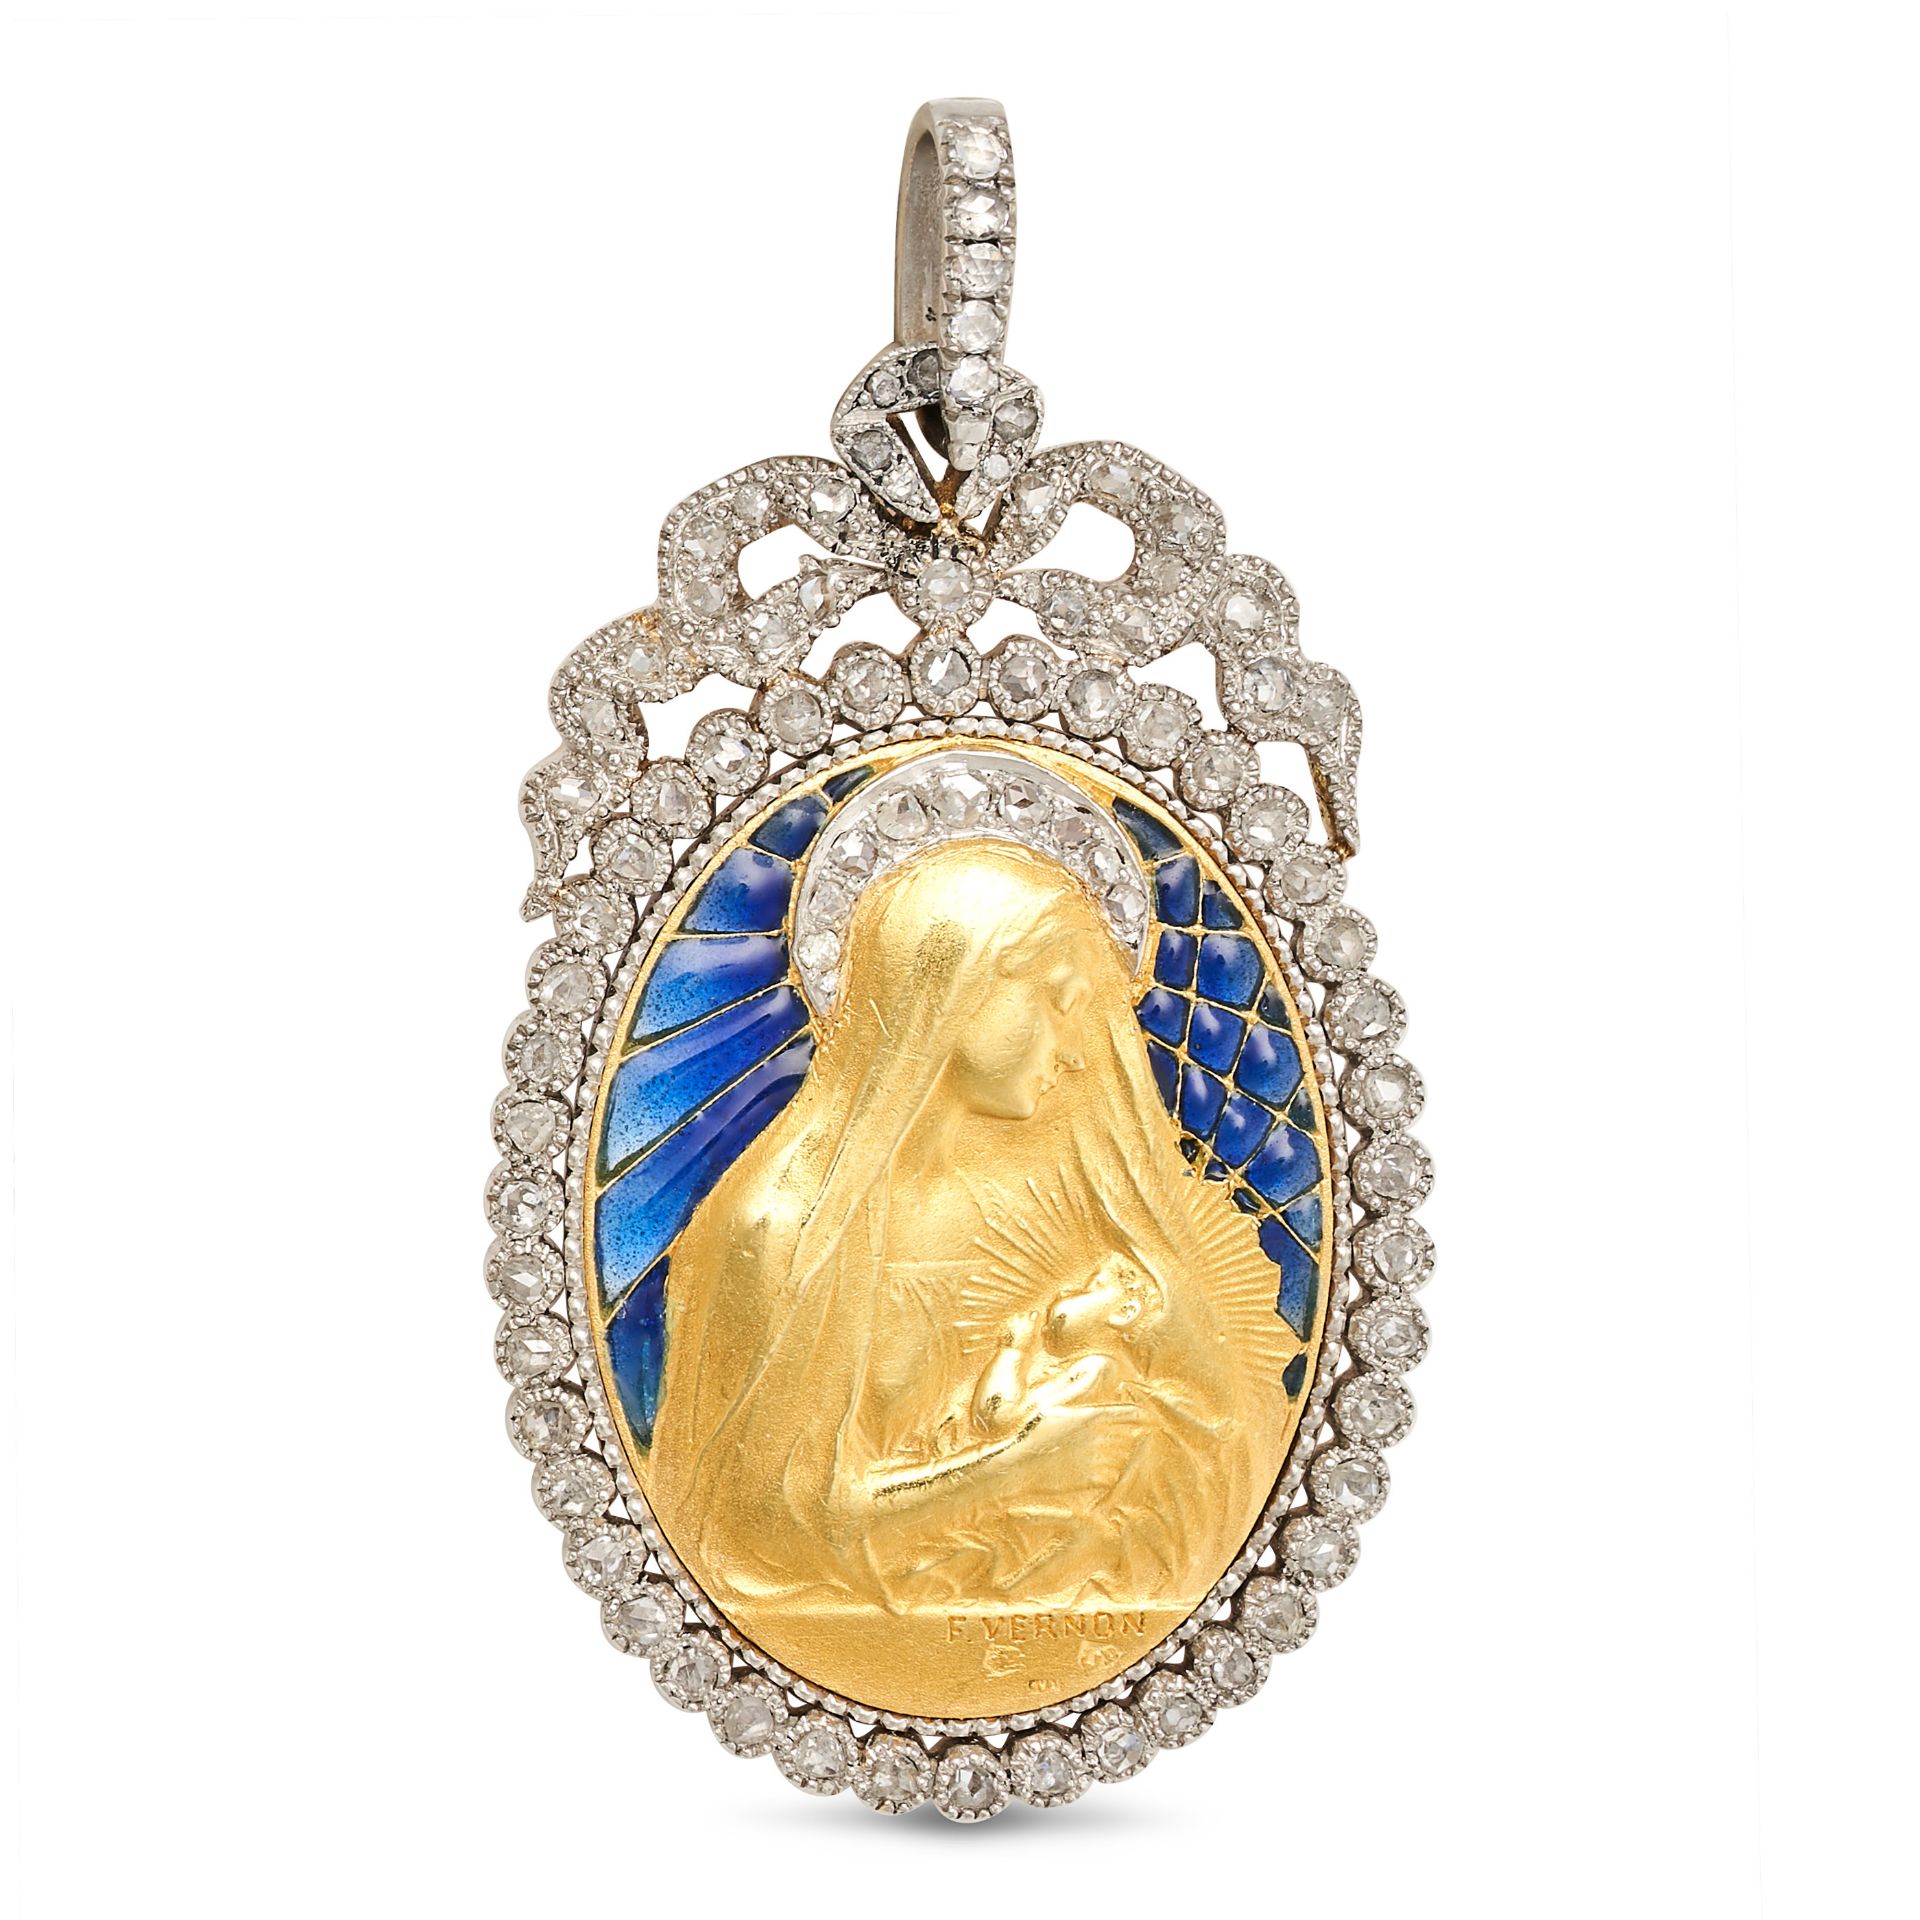 F. VERNON, AN ANTIQUE DIAMOND AND ENAMEL MADONNA PENDANT in 18ct yellow and white gold, the gold ...